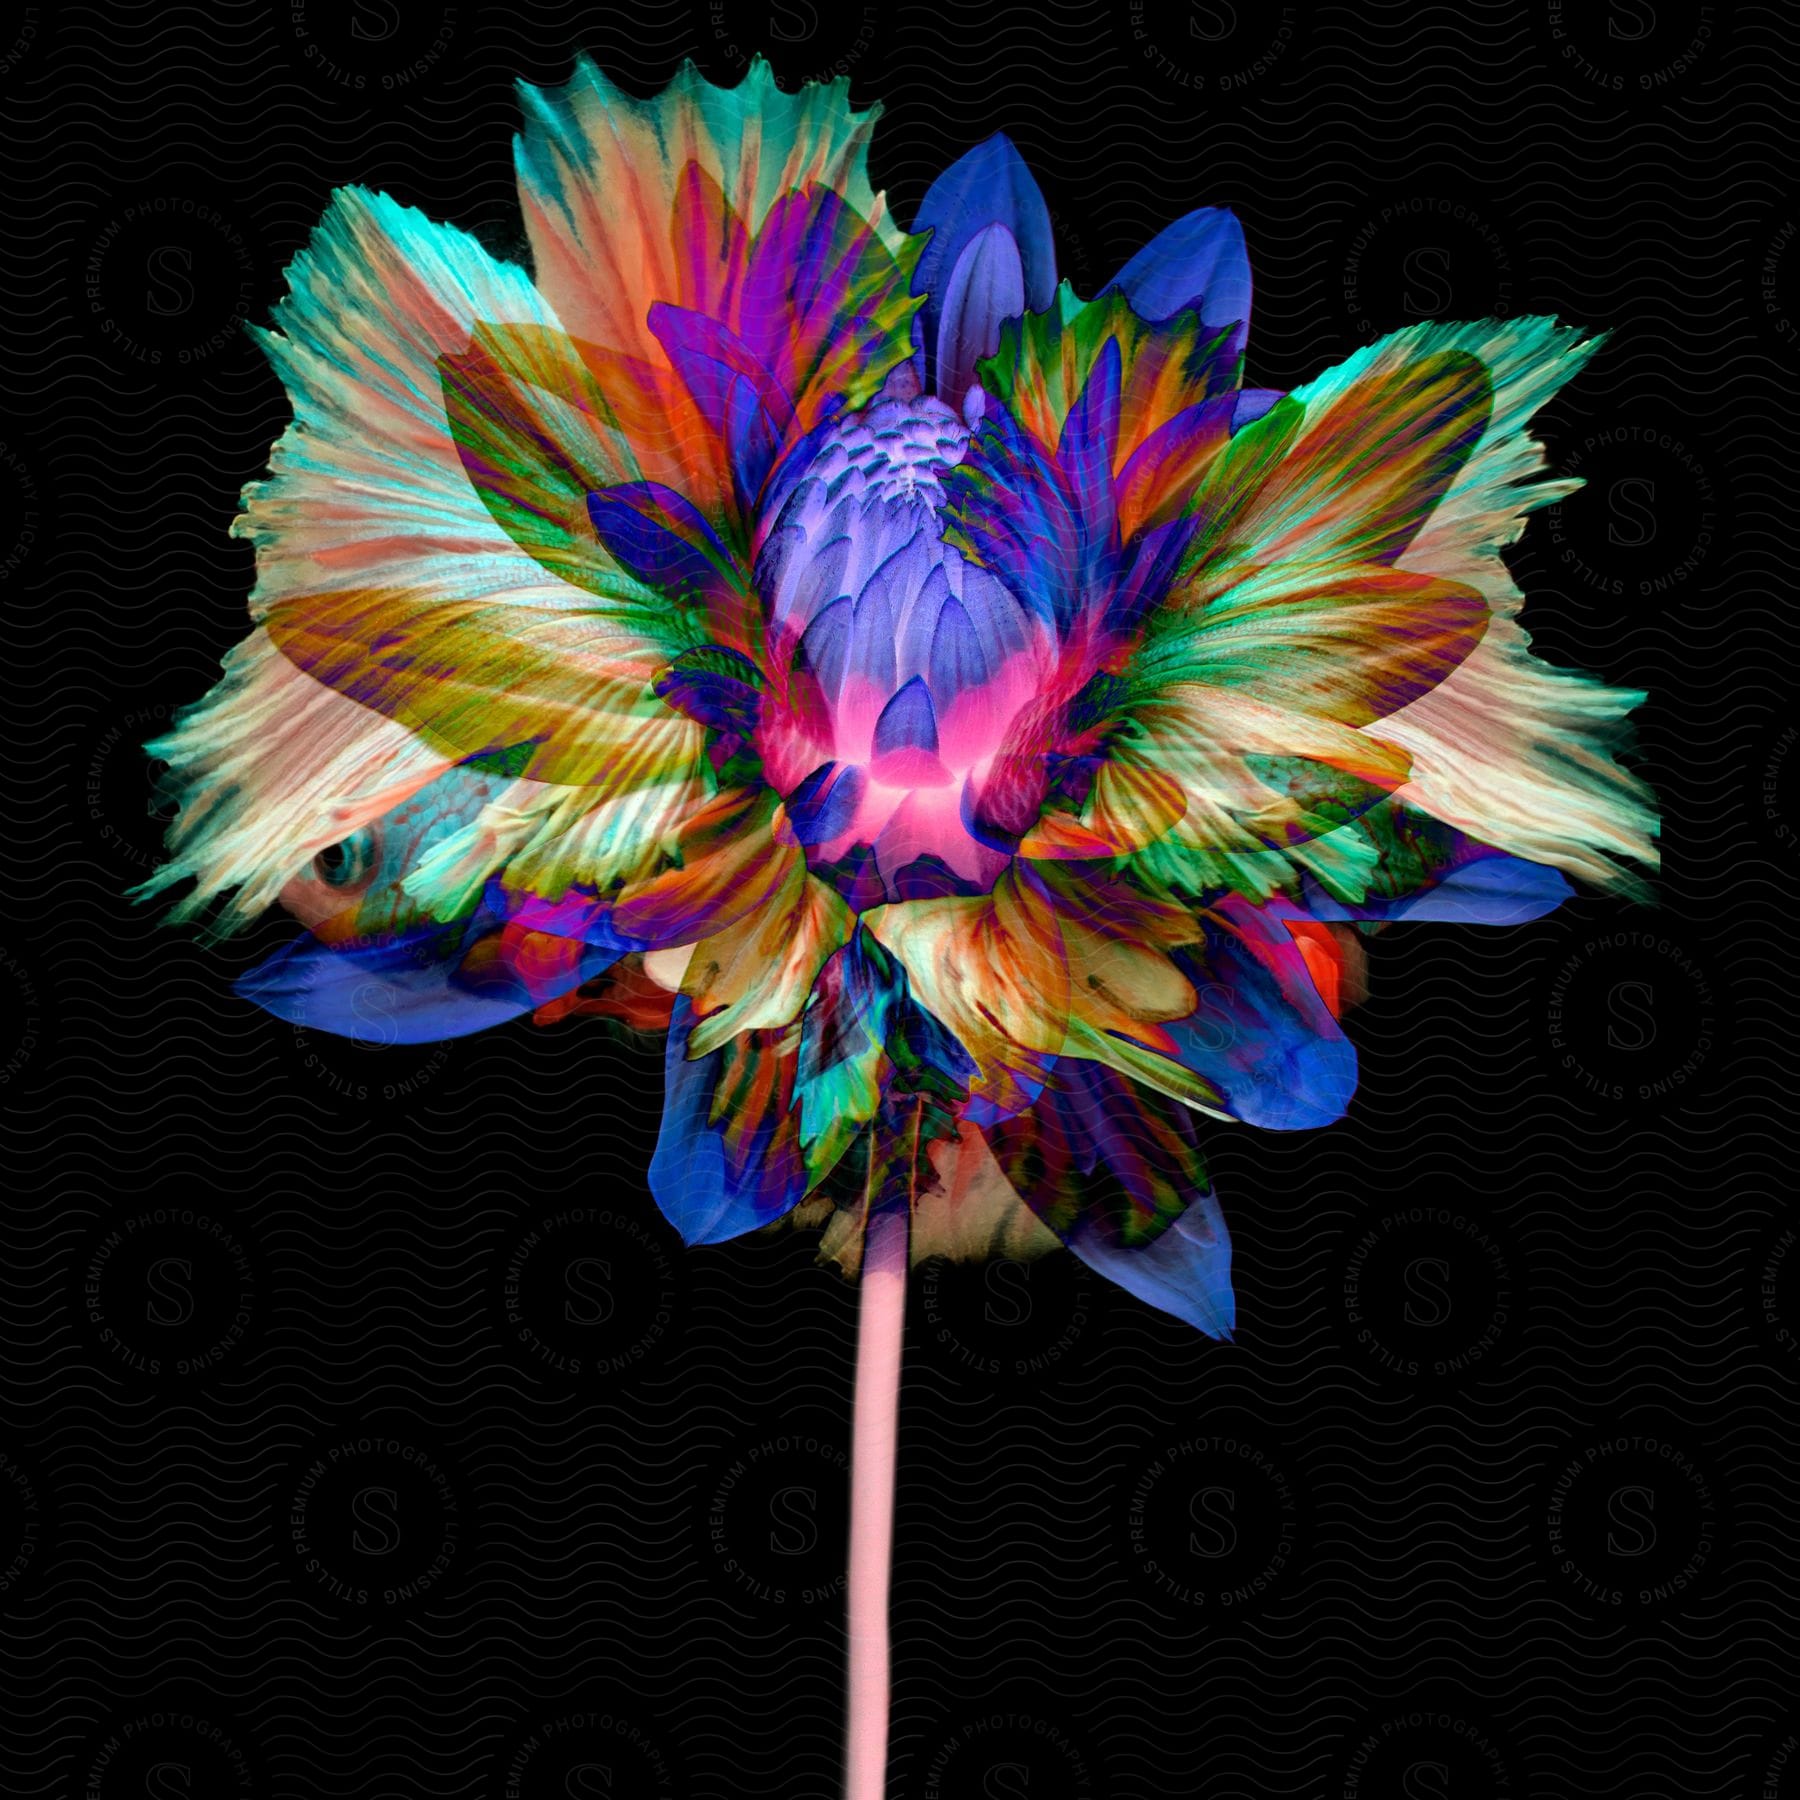 An artwork featuring a colorful feathered animal against a black background